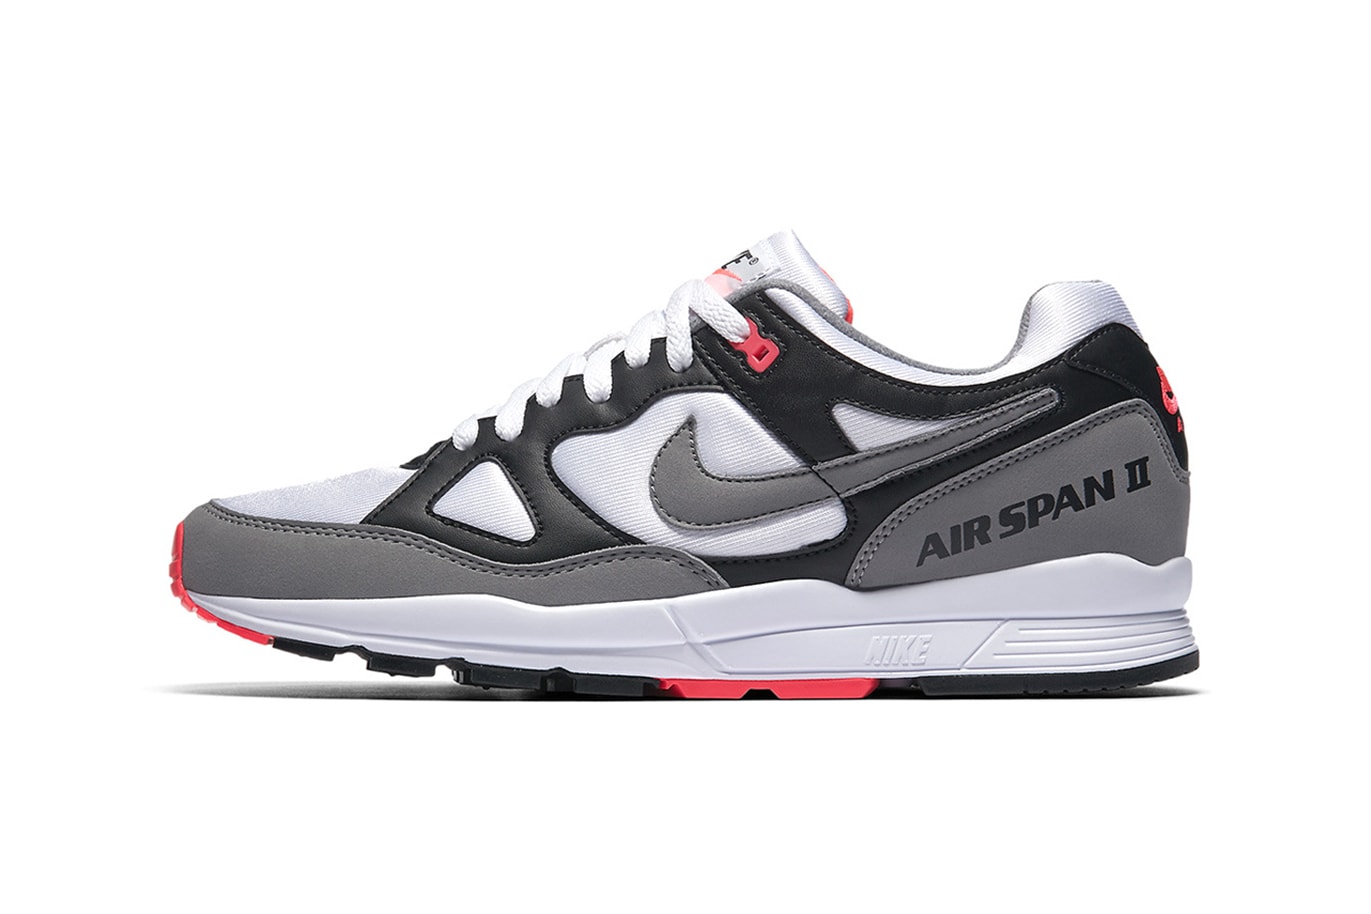 Nike Air Span 2 "Hot Coral" Reissue Patta Collaboration sneaker footwear trainers gray grey black white pink red Release Date Info Pricing